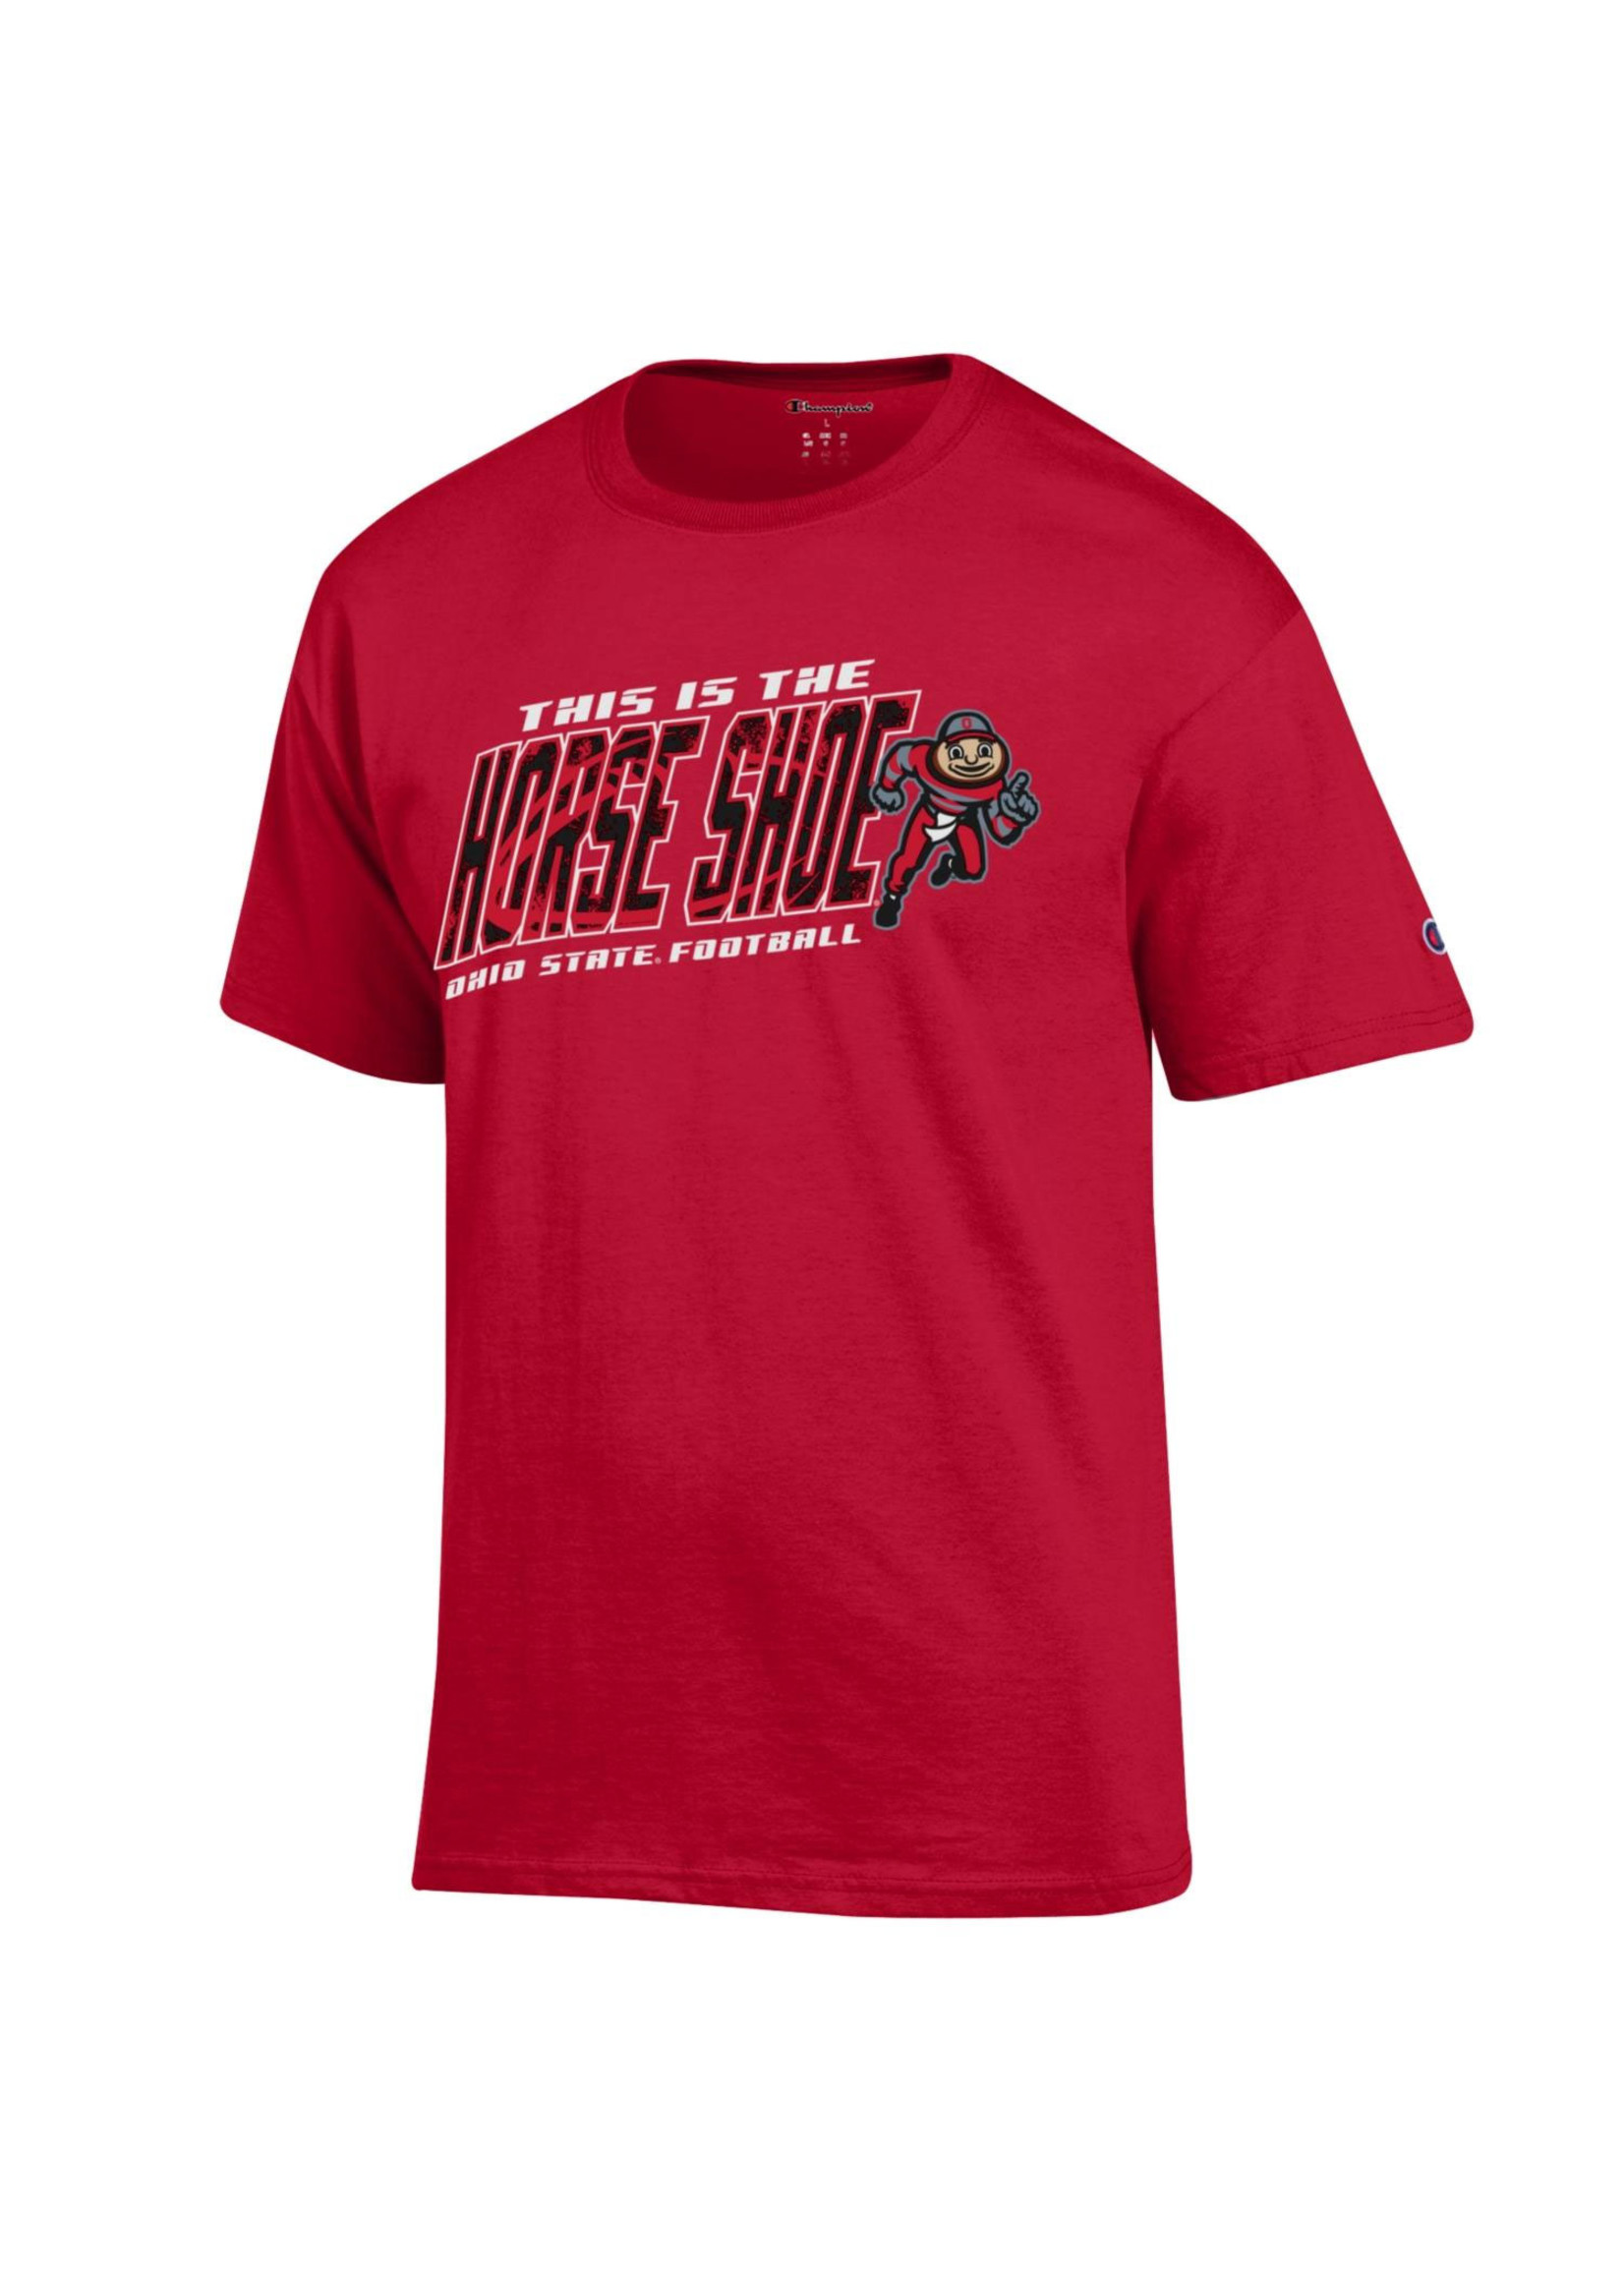 Champion Ohio State Buckeyes This is the Horse Shoe Tee